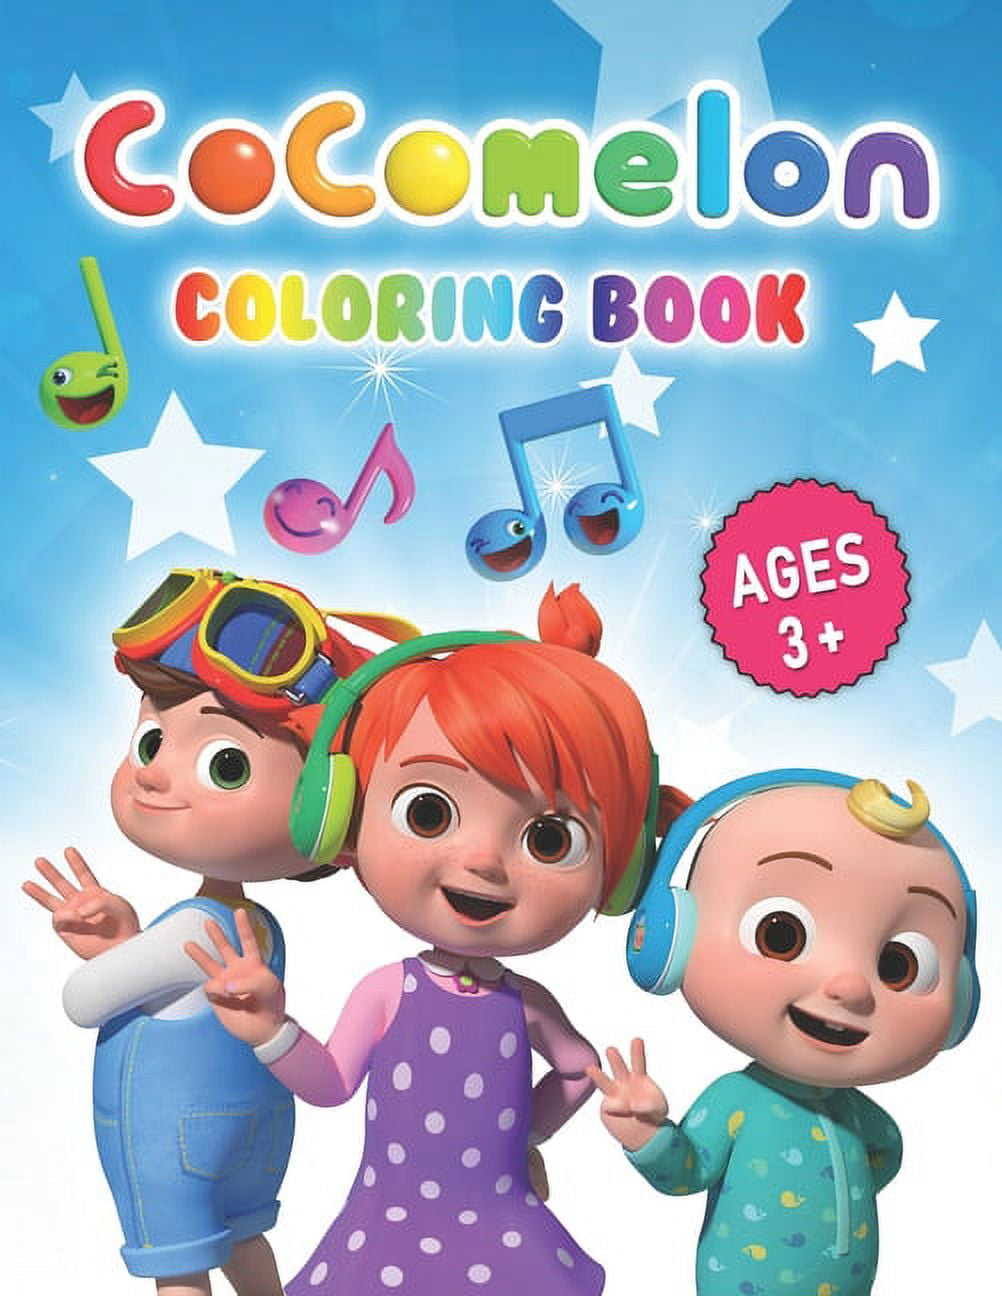 Cocomelon Coloring Book For Kids : Enjoyable Coloring Book for Kids Ages  2-5+ who Love Cocomelon animation (Paperback)